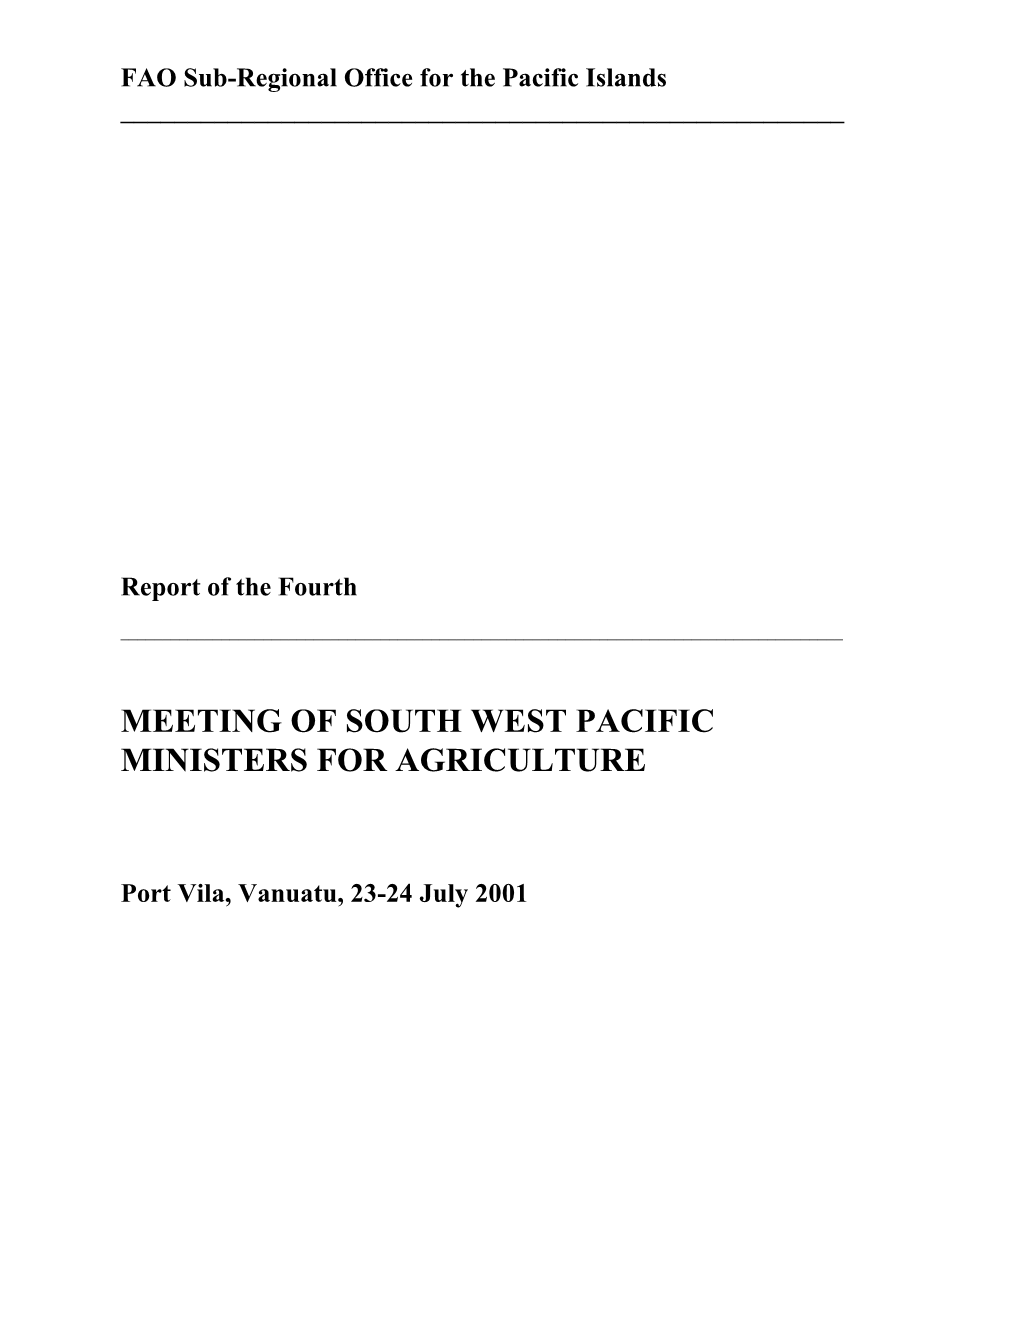 Report of the Fourth Ministers' Meeting